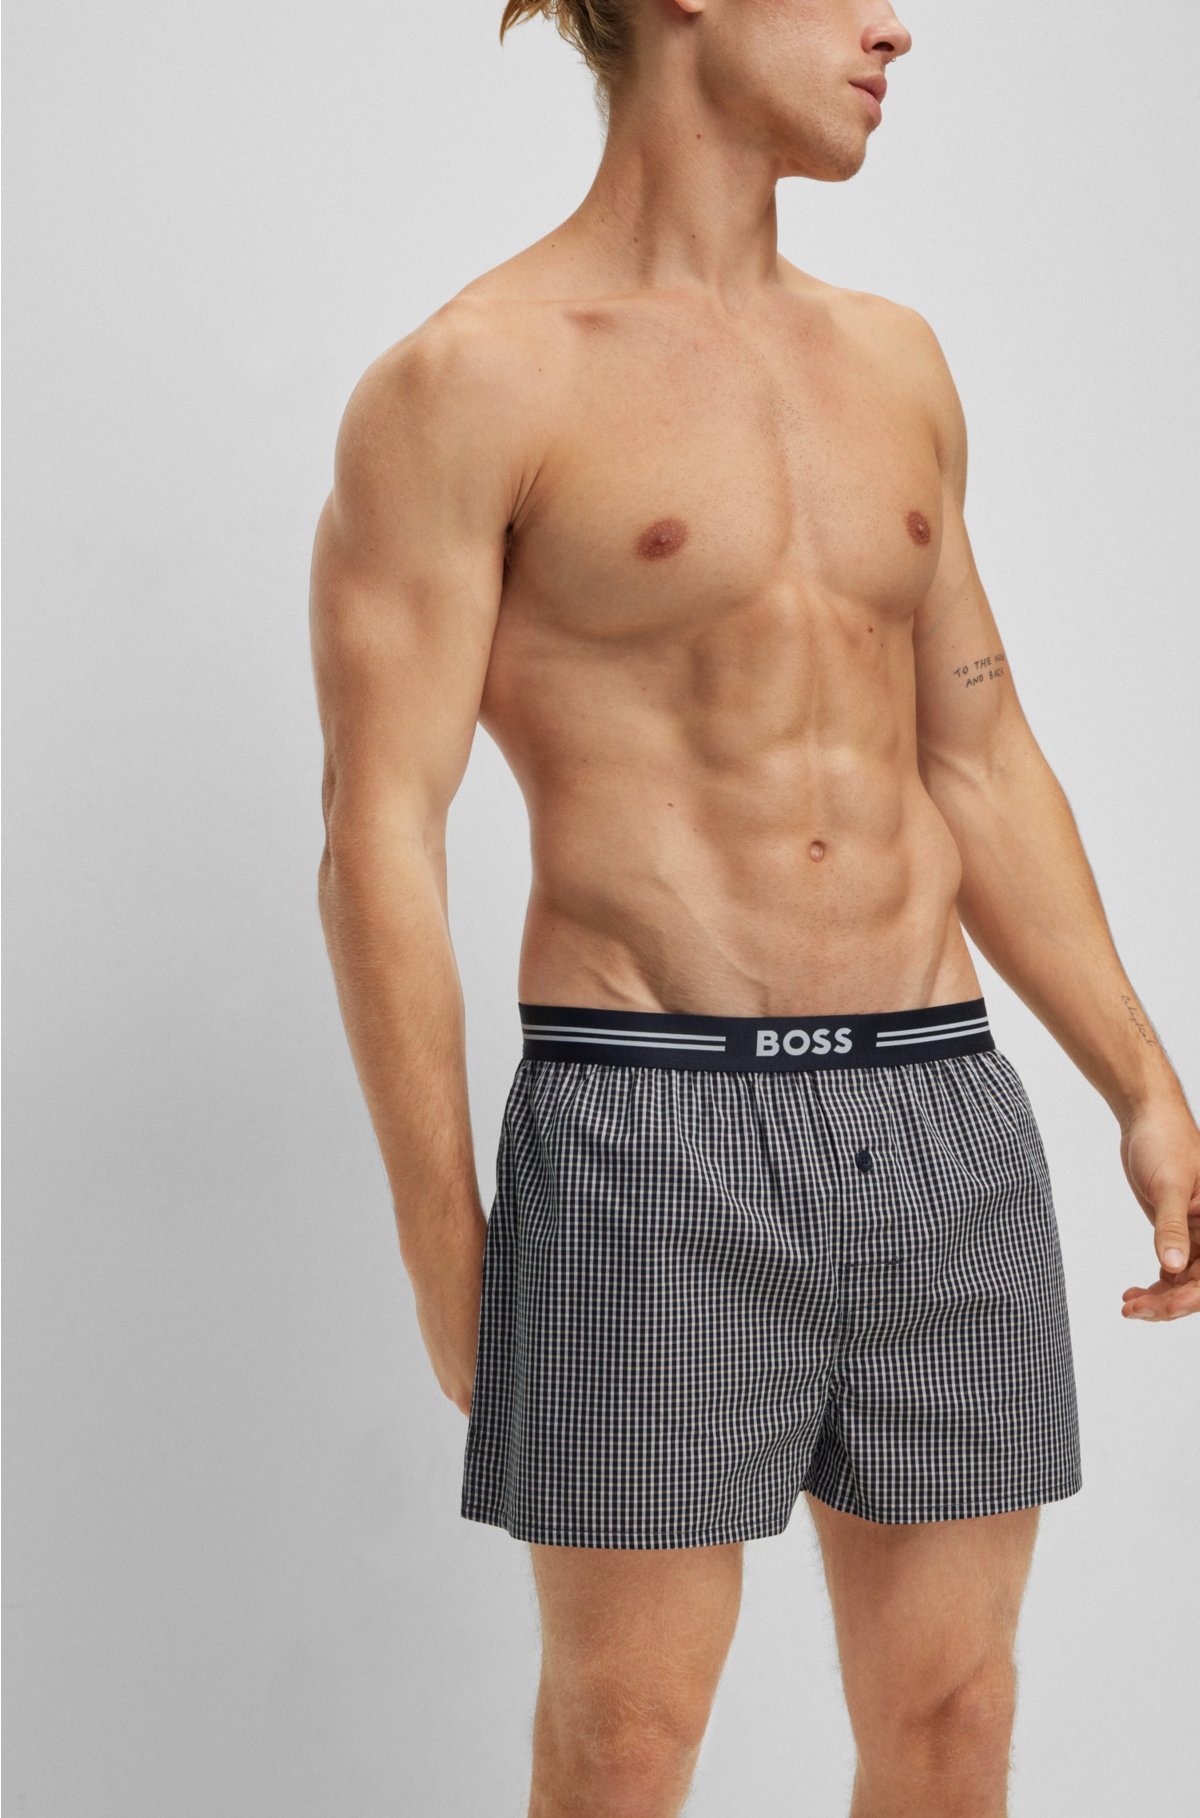 BOSS - with logo Two-pack of shorts pyjama cotton waistbands